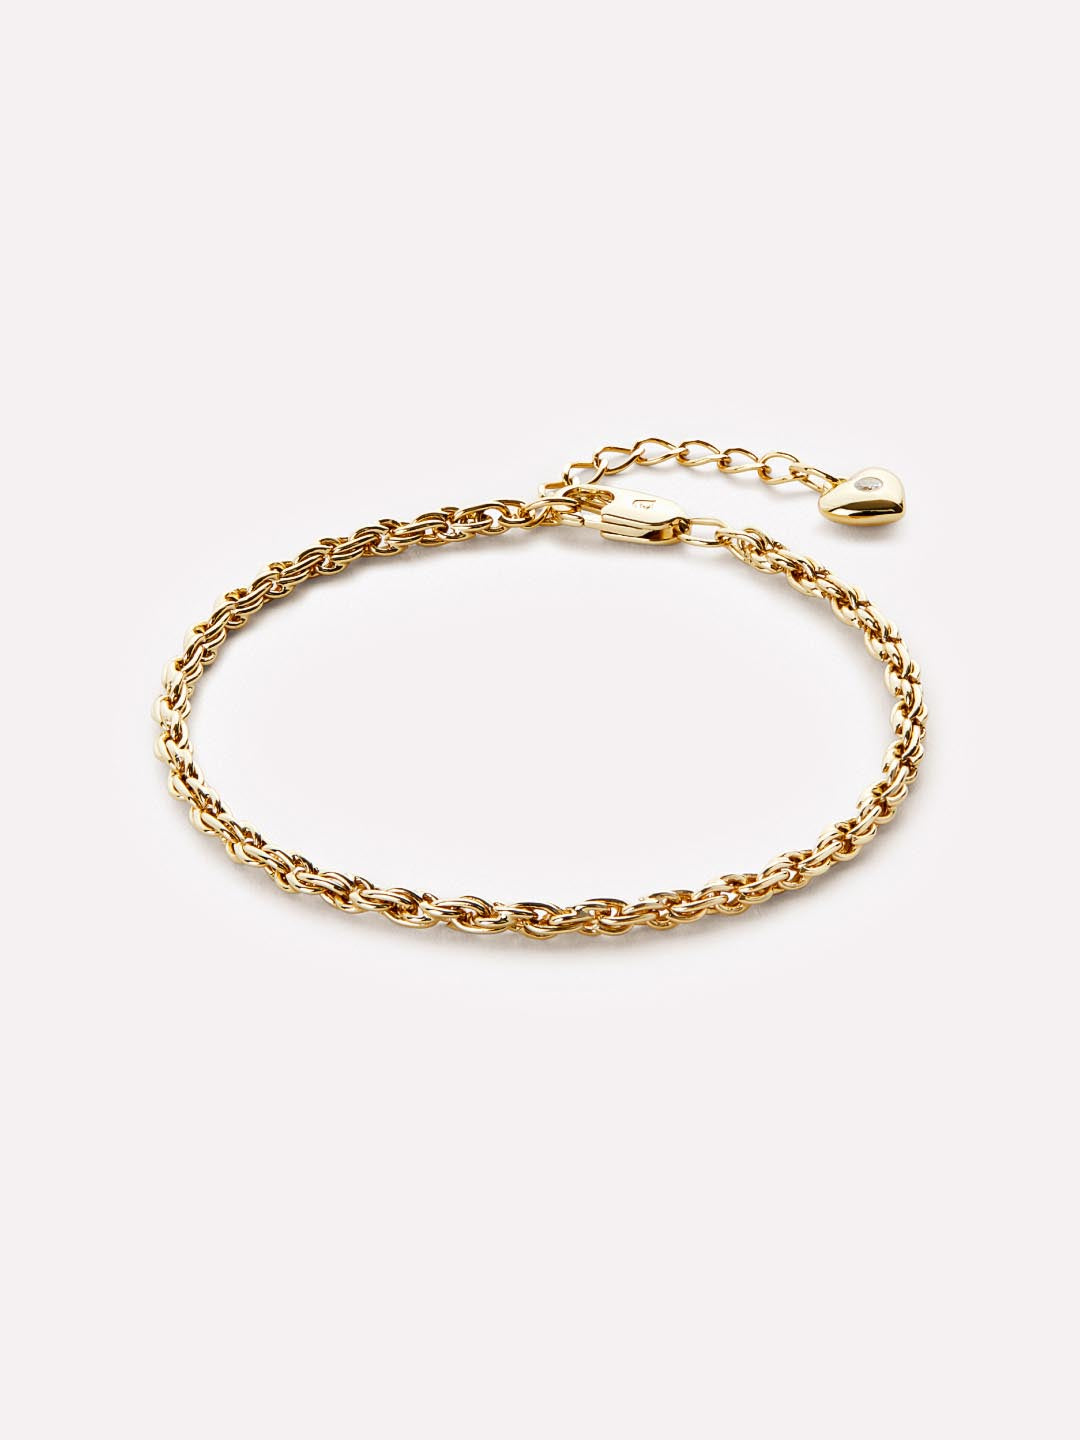 Buy One Gram Gold Guarantee Daily Use Chain Type Hand Bracelet Design Online